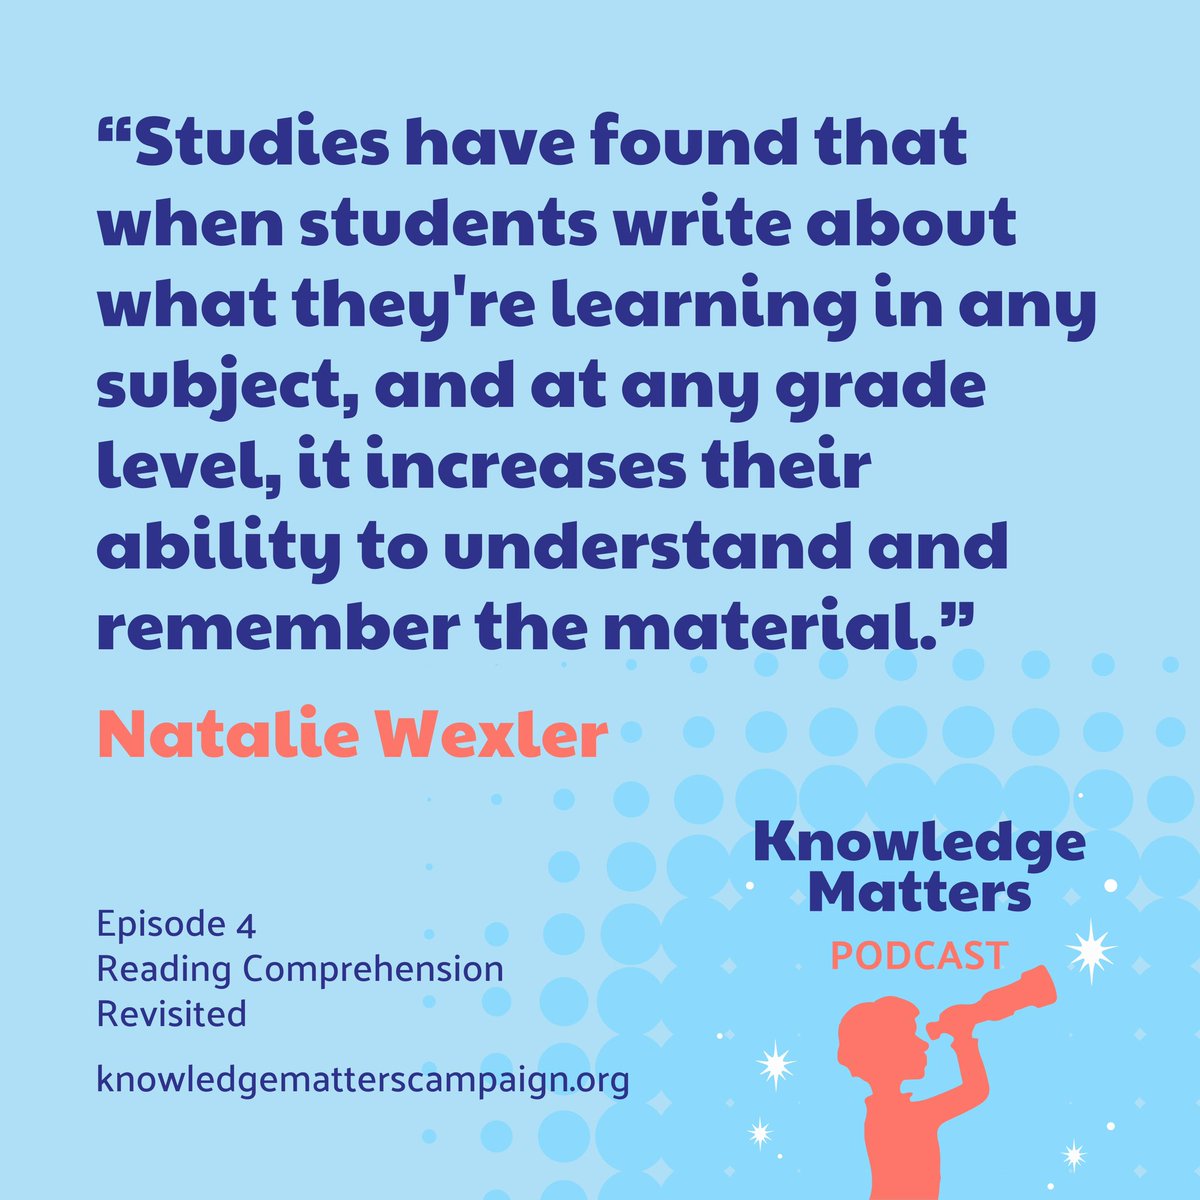 Reading + writing about learned material is critical! Writing instruction within content literacy looks different than the writing models used in most classrooms. Hear from educators using content-rich curricula in the #KnowledgeMatters Podcast! 🔗 knowledgematterscampaign.org/podcast/